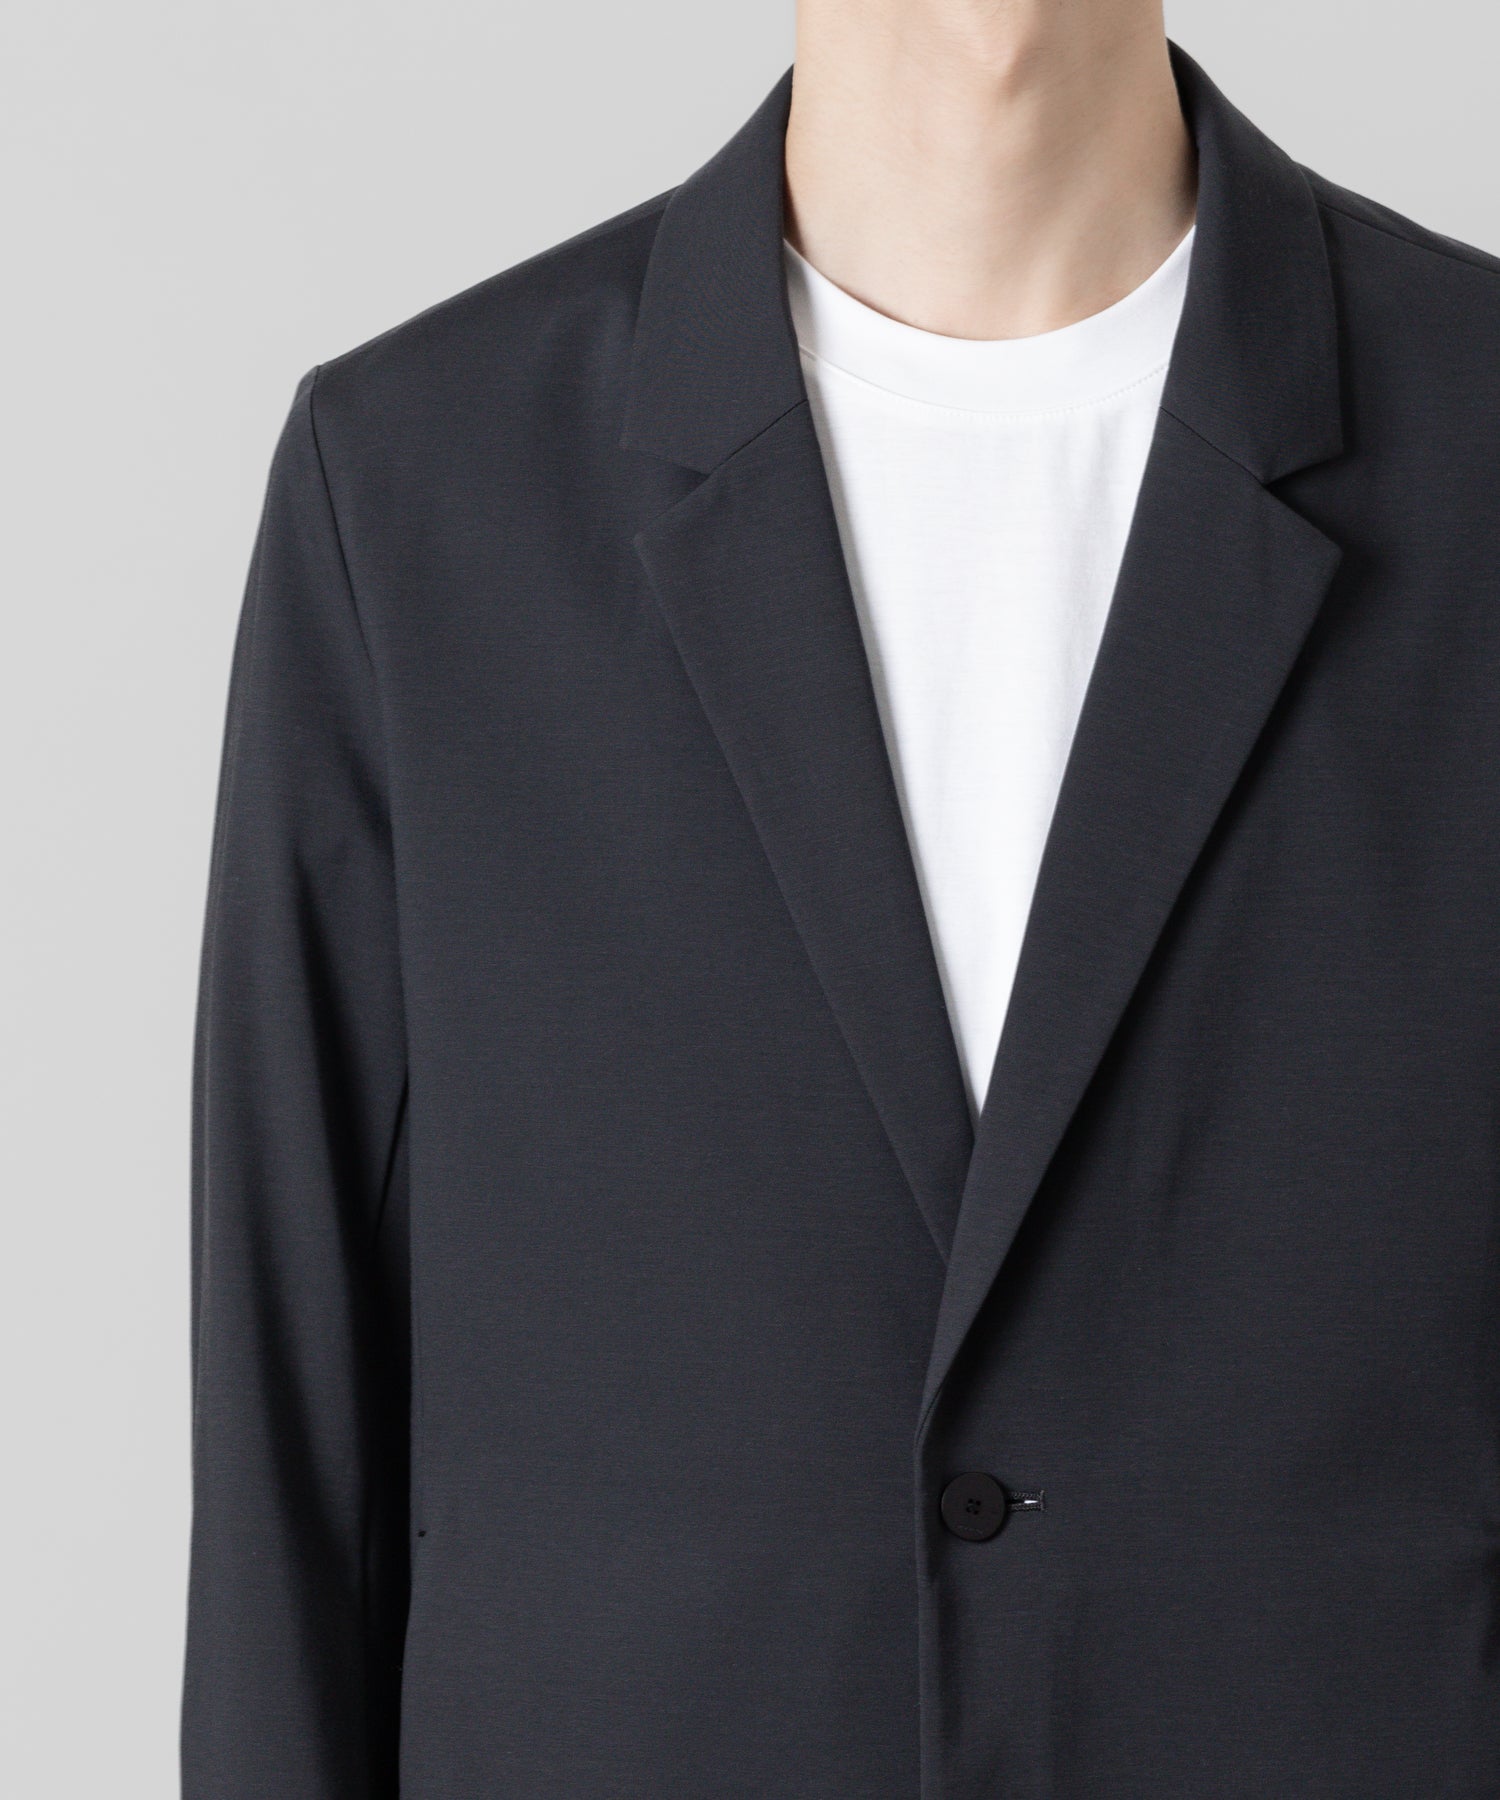 【ATTACHMENT】ATTACHMENT アタッチメントのNY/CO STRETCH JERSEY 2B JACKET - D.GRAY 公式通販サイトsession福岡セレクトショップ